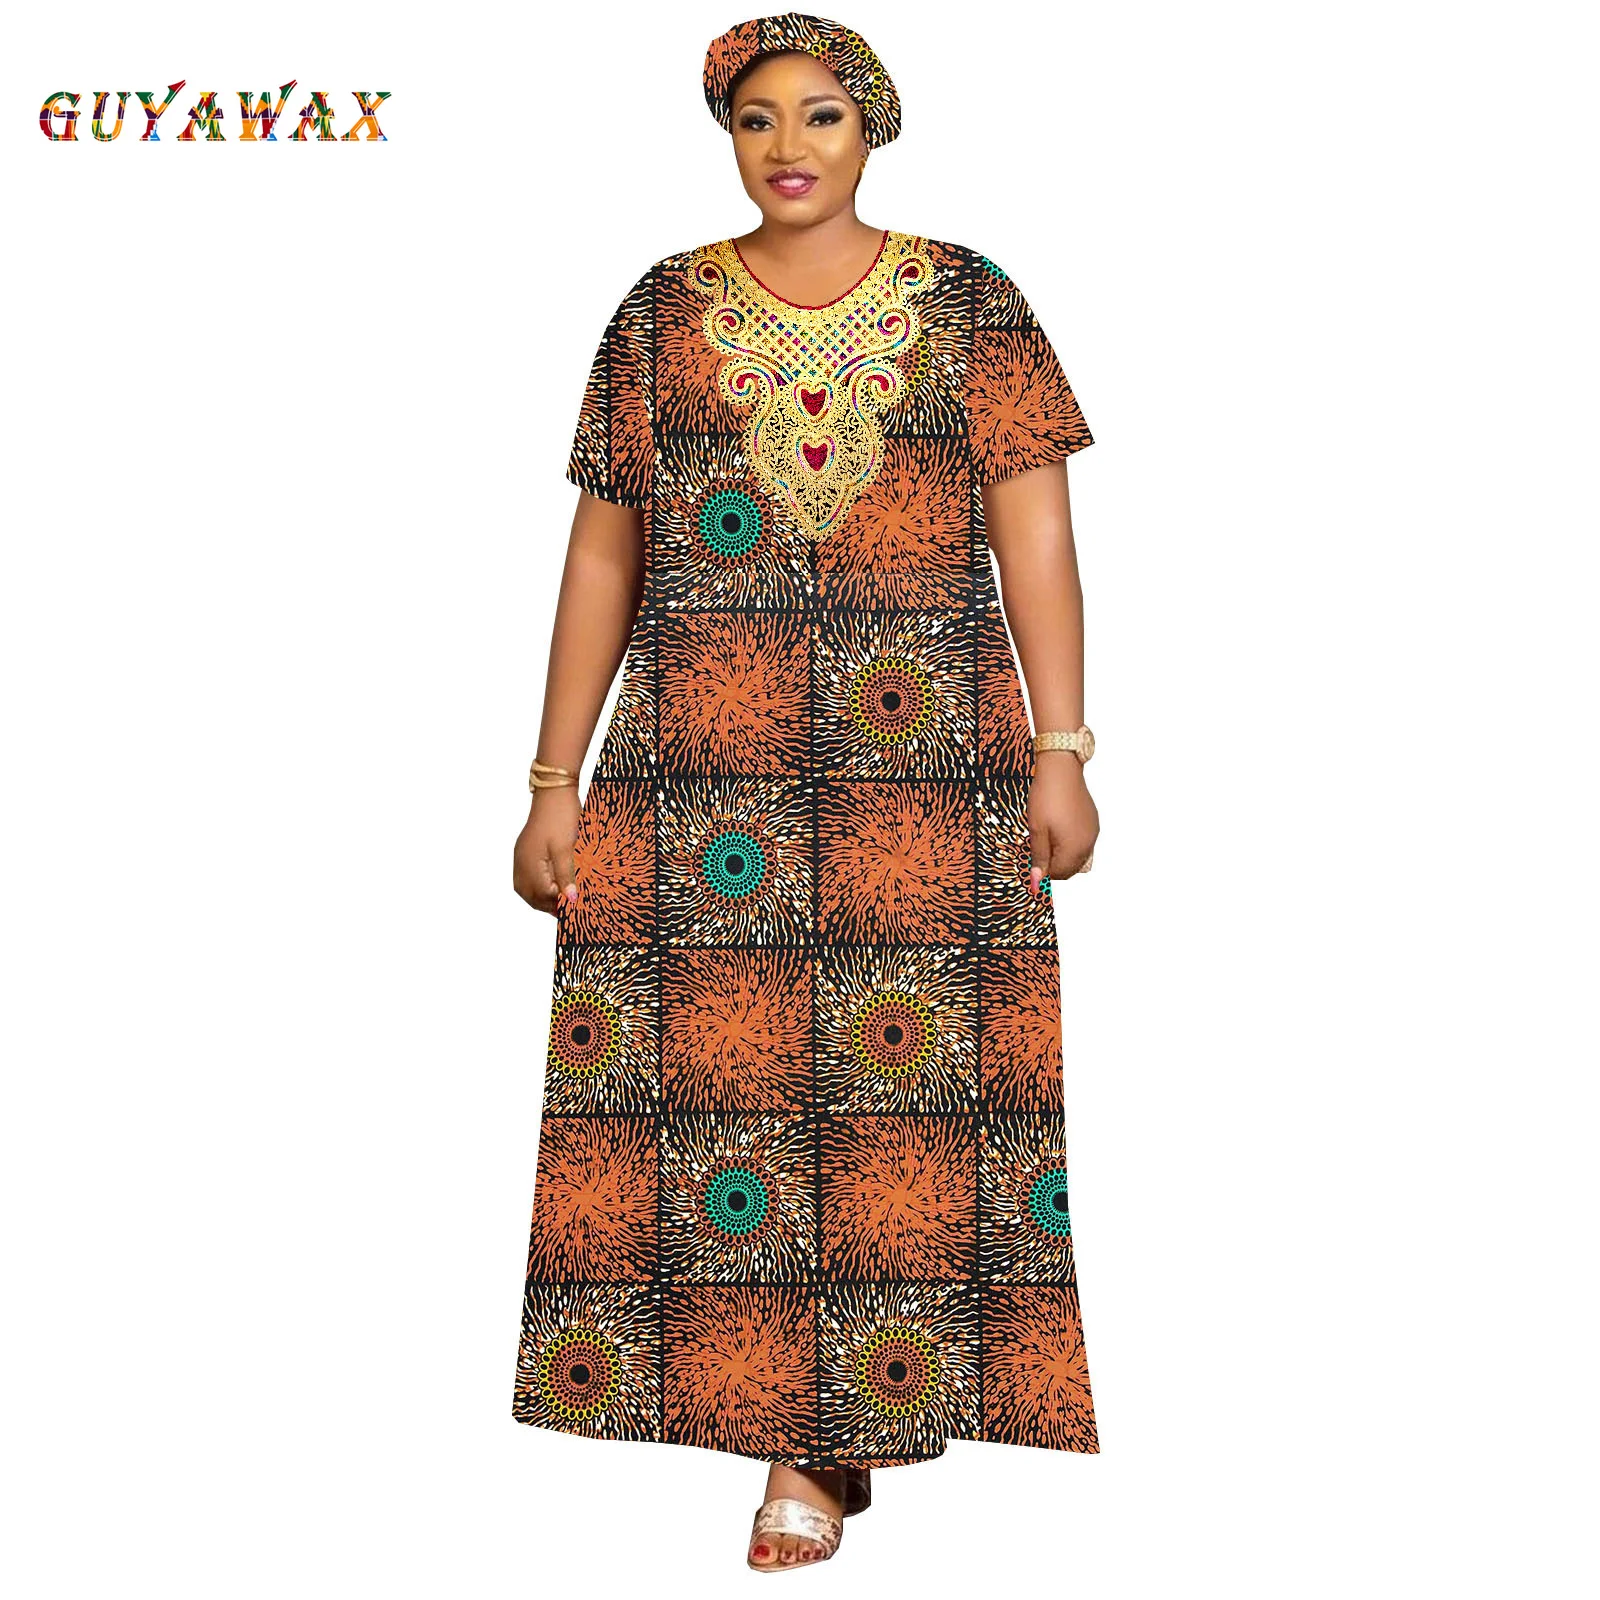 Dashiki Dresses for Women Tailor Made Short Sleeves Ankle Length Casual Cotton Dress with Head Scarf Print Attire Dashiki Outfit